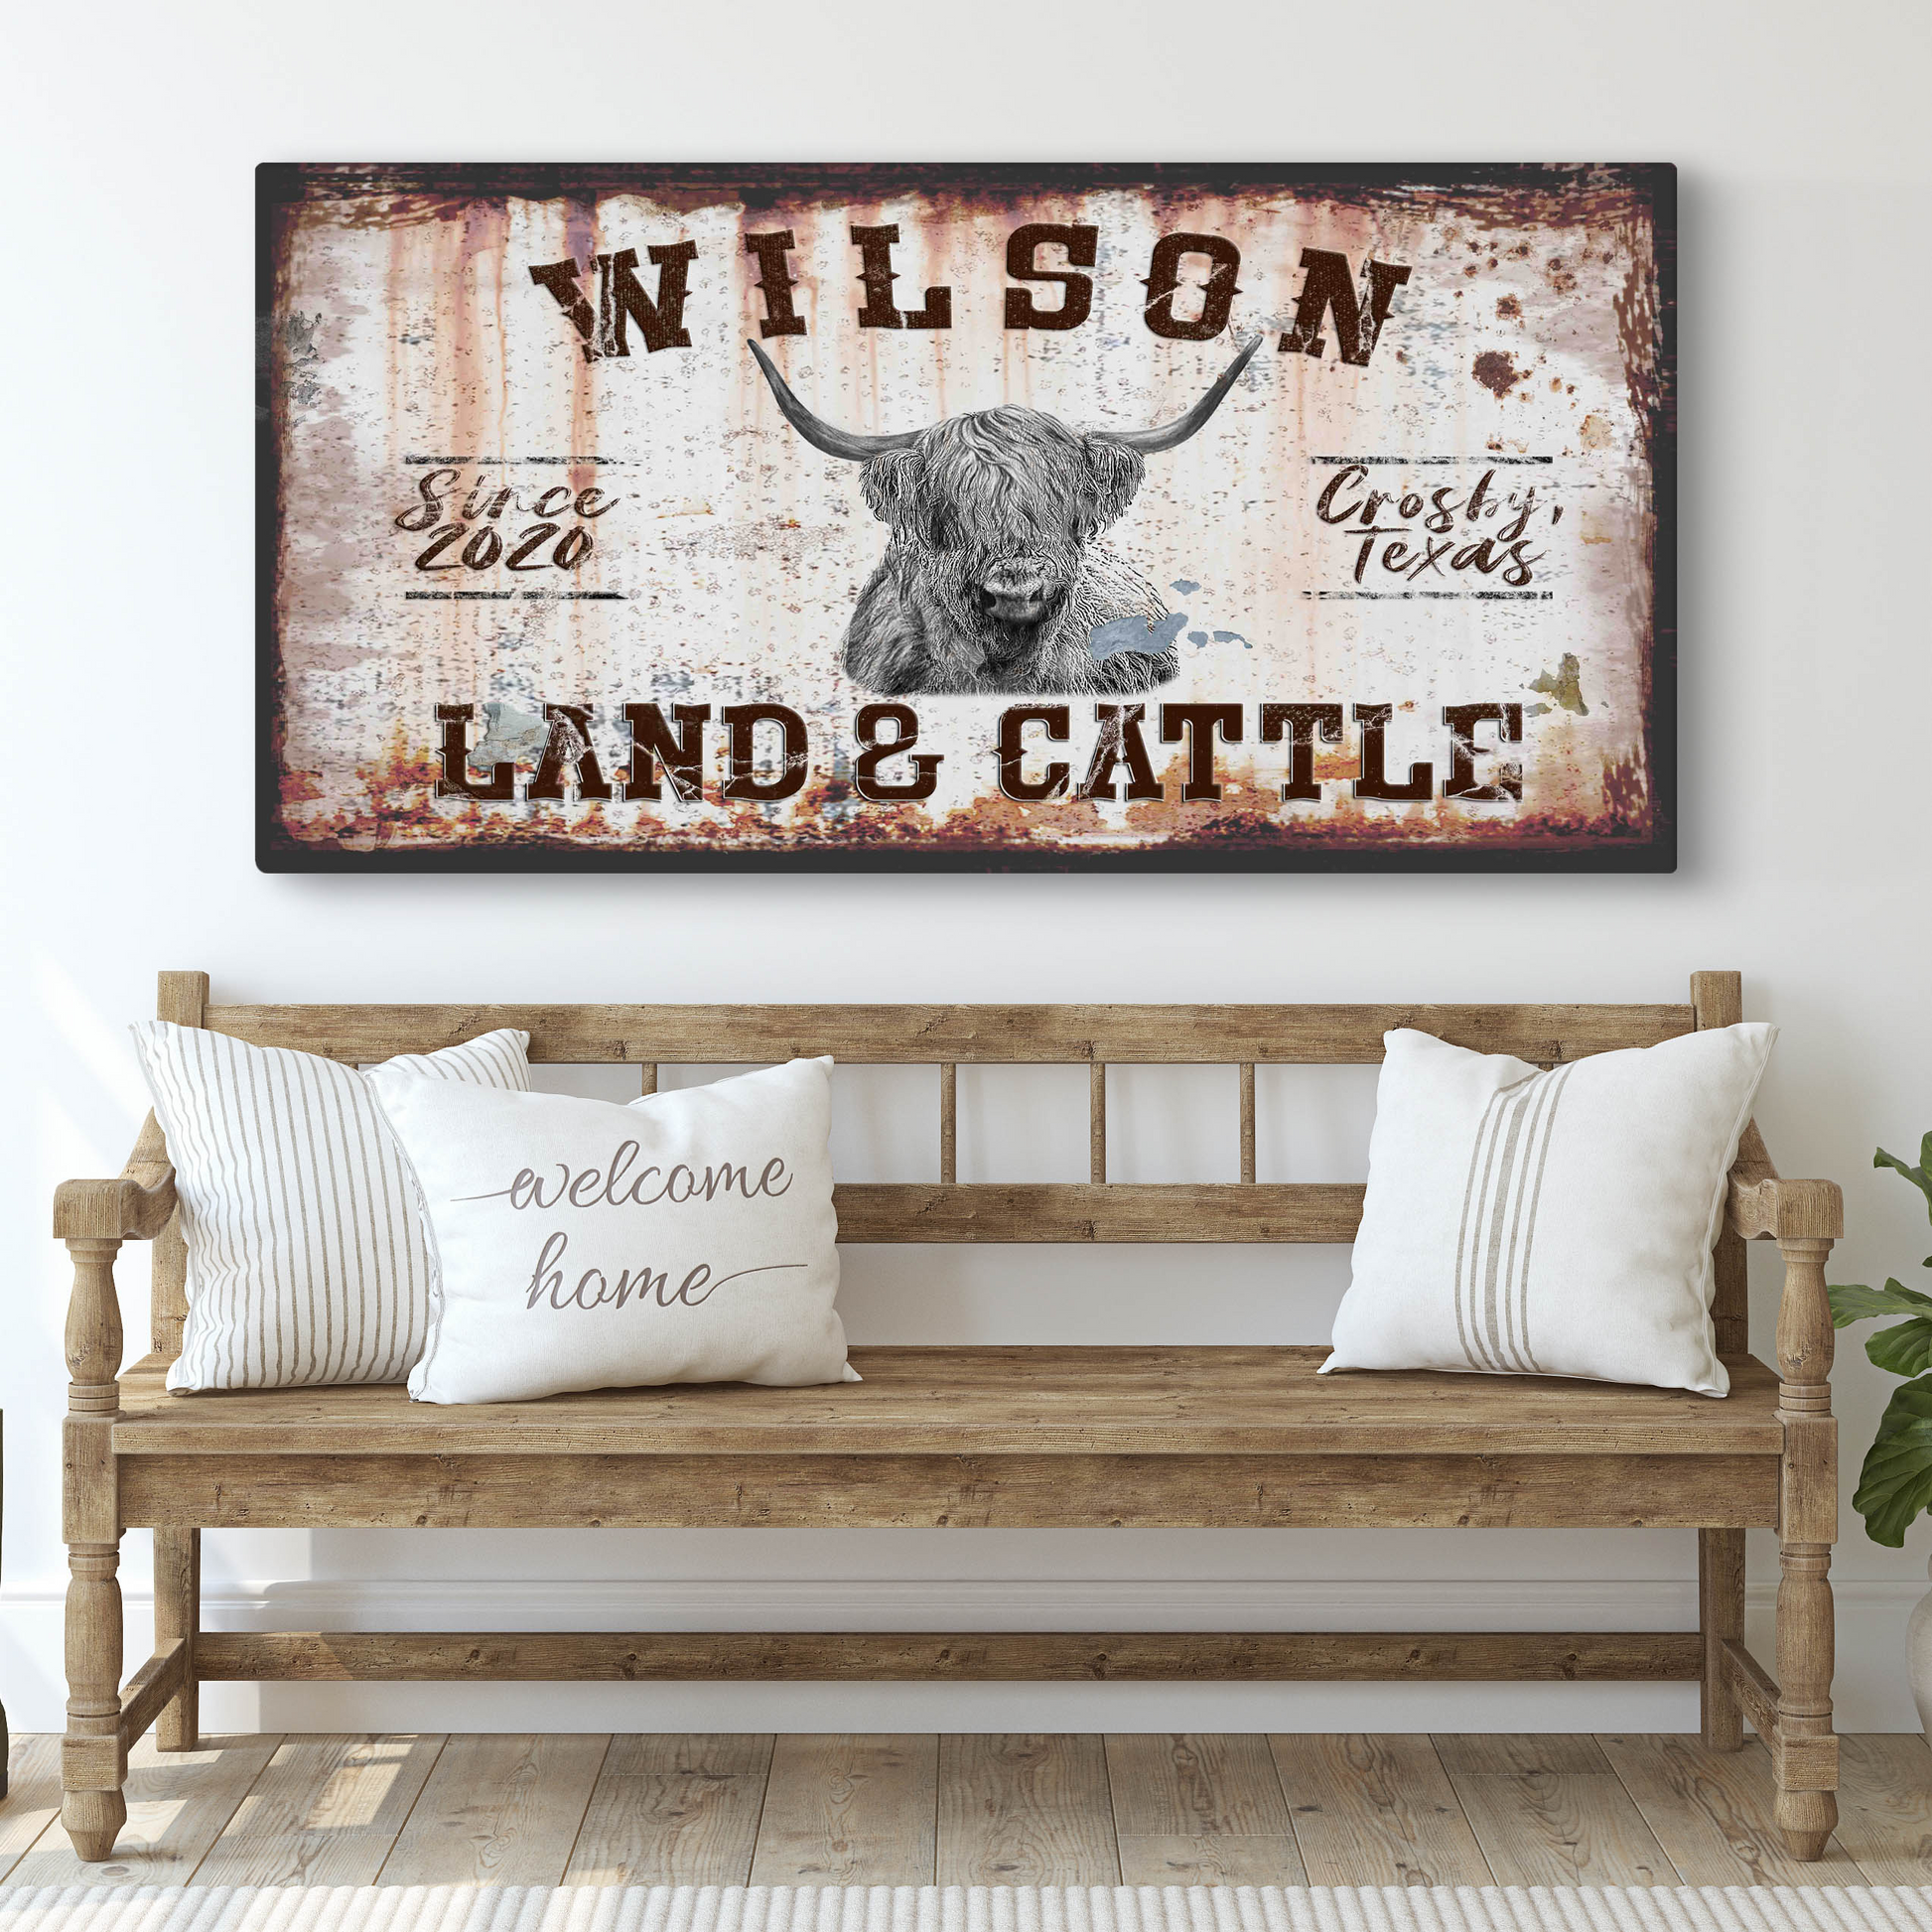 Land and Cattle Decor Sign Style 2 - Image by Tailored Canvases